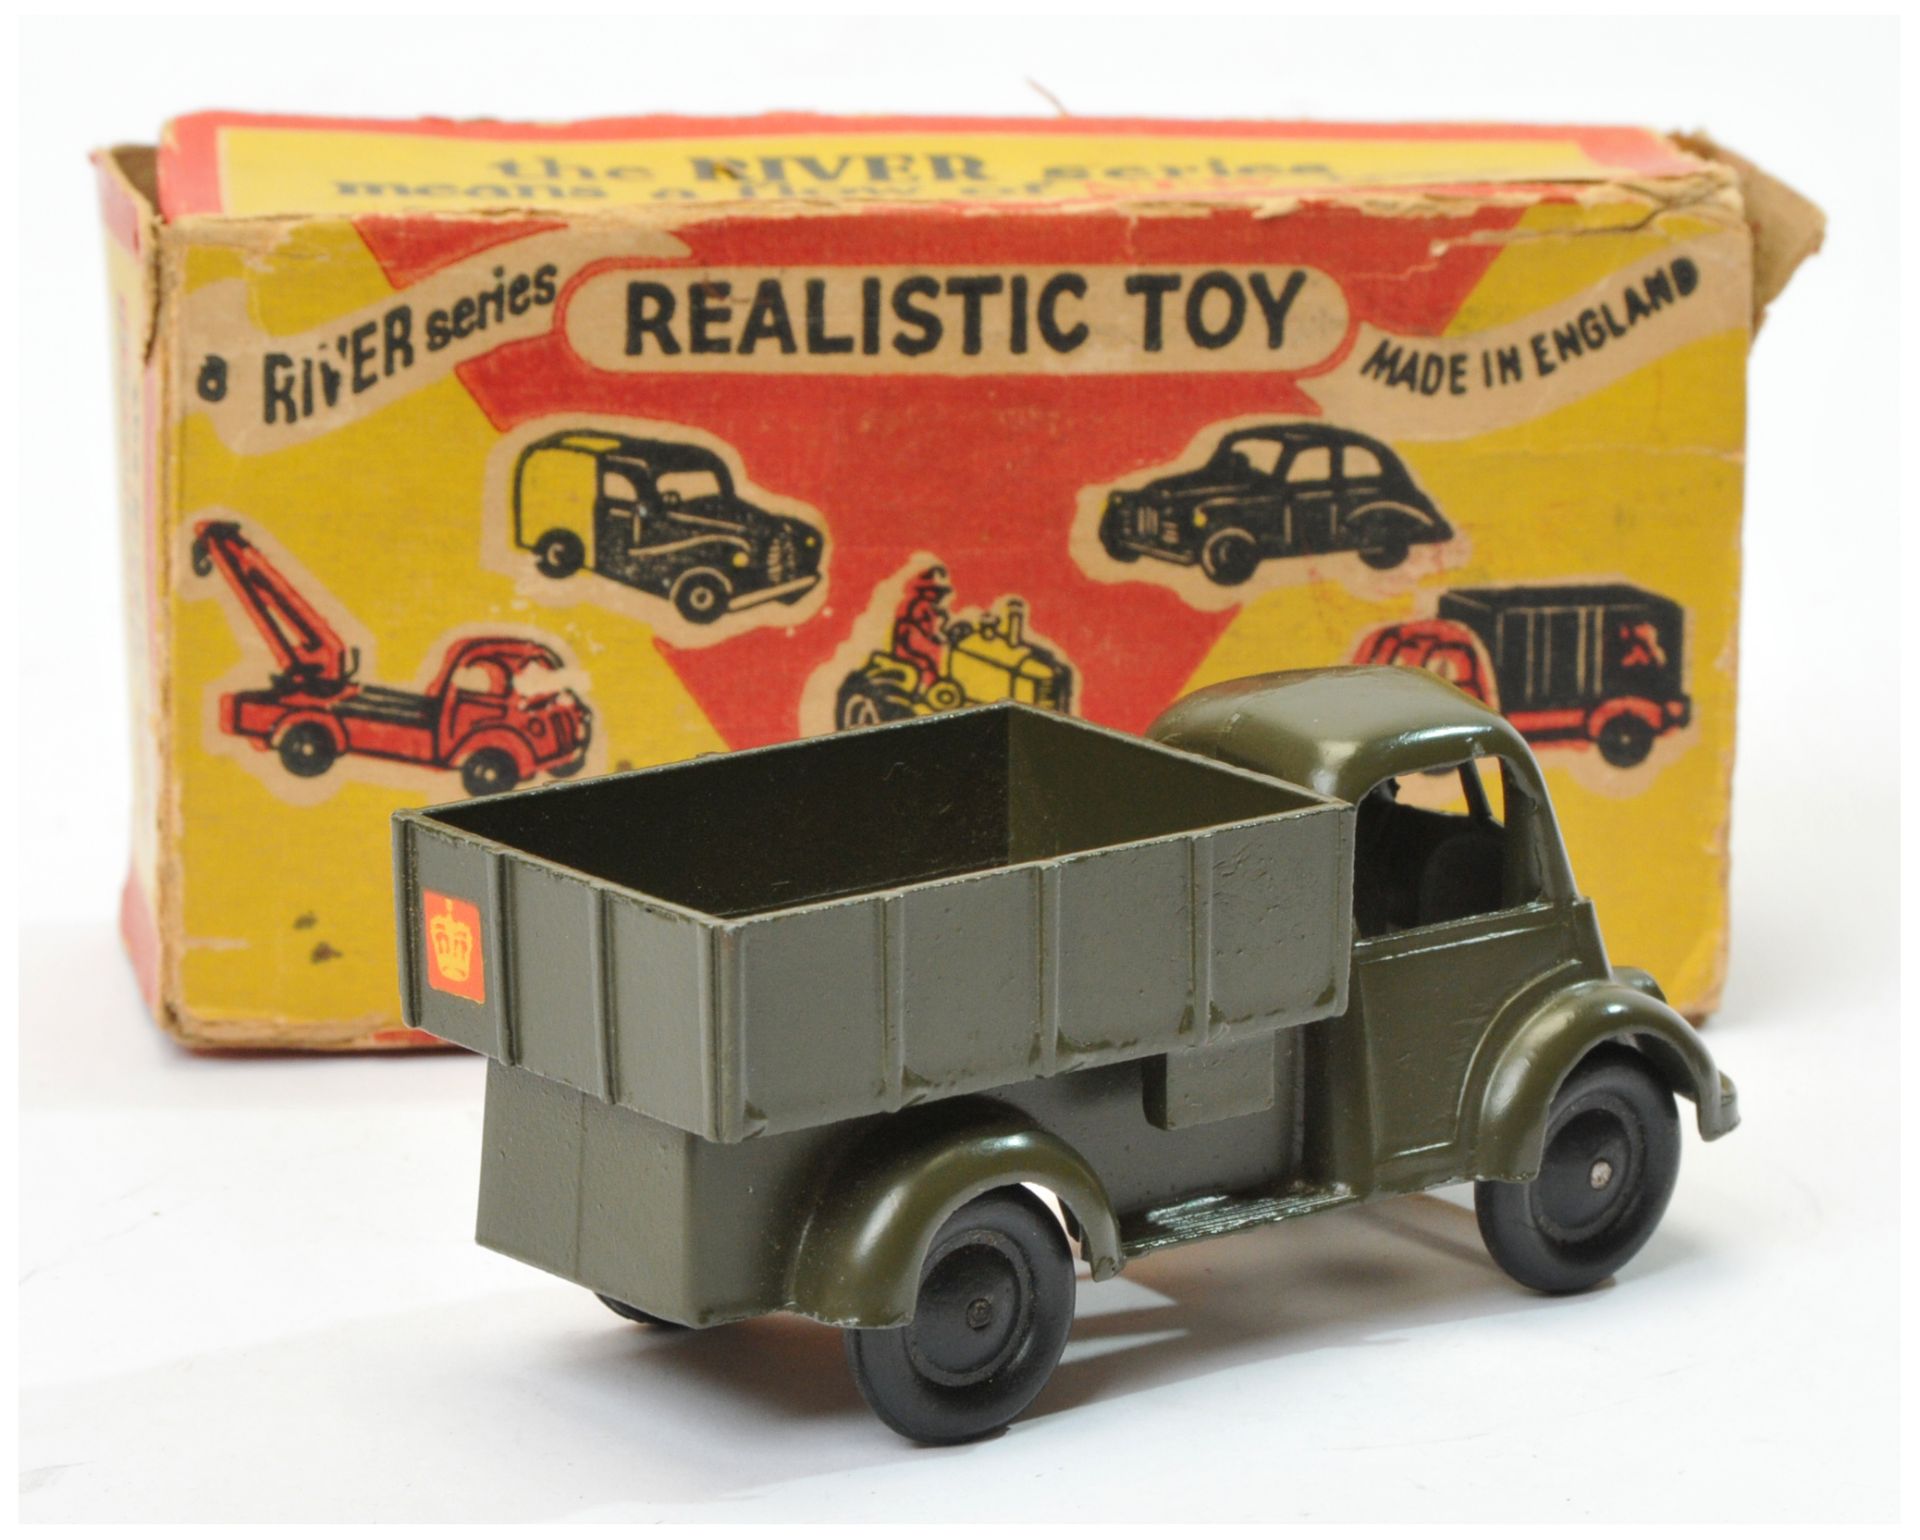 River Series Military open back lorry  - dark military olive green, black wheels with rear decal  - Image 2 of 2